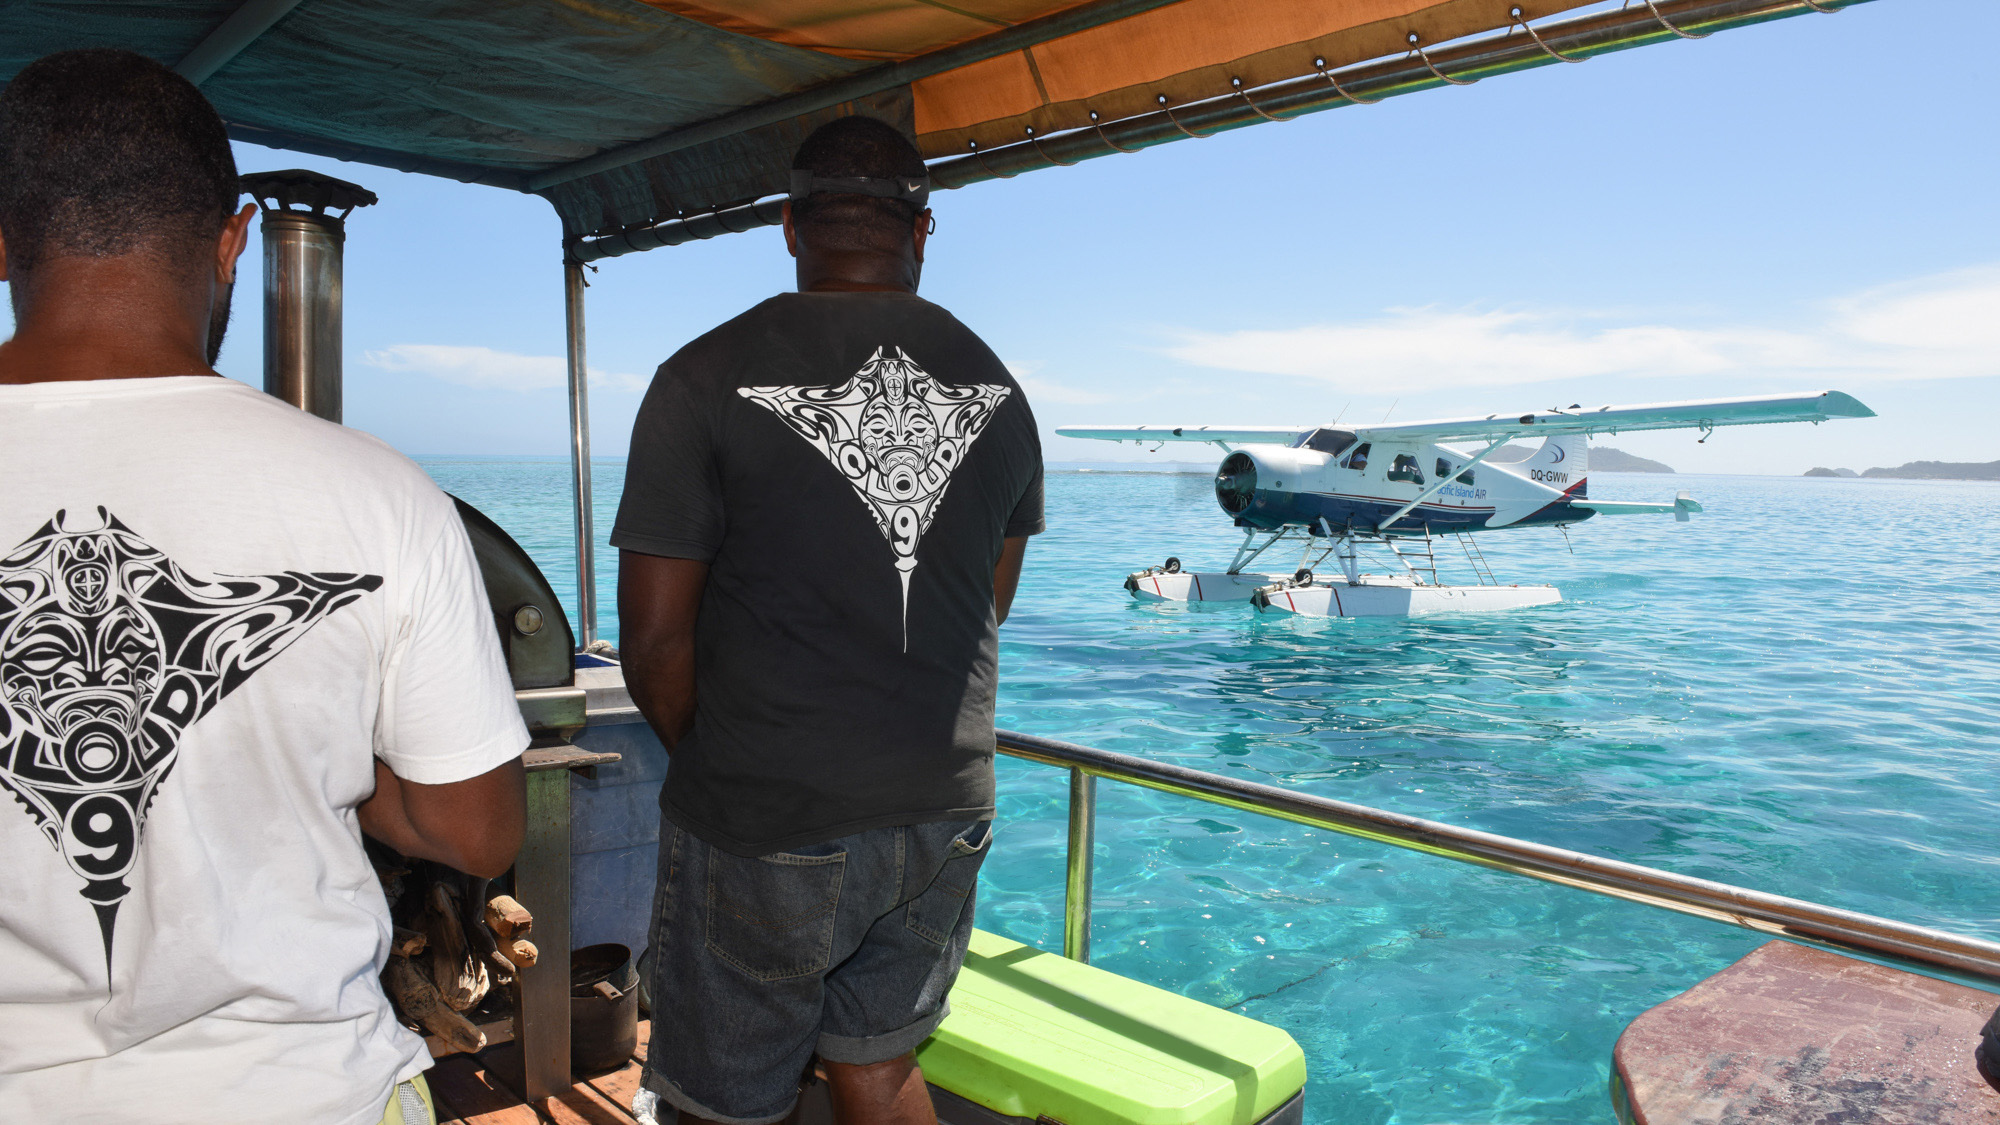 Composition with Cloud 9's team on the left and the seaplane on the right wearing tee shirt with Logo